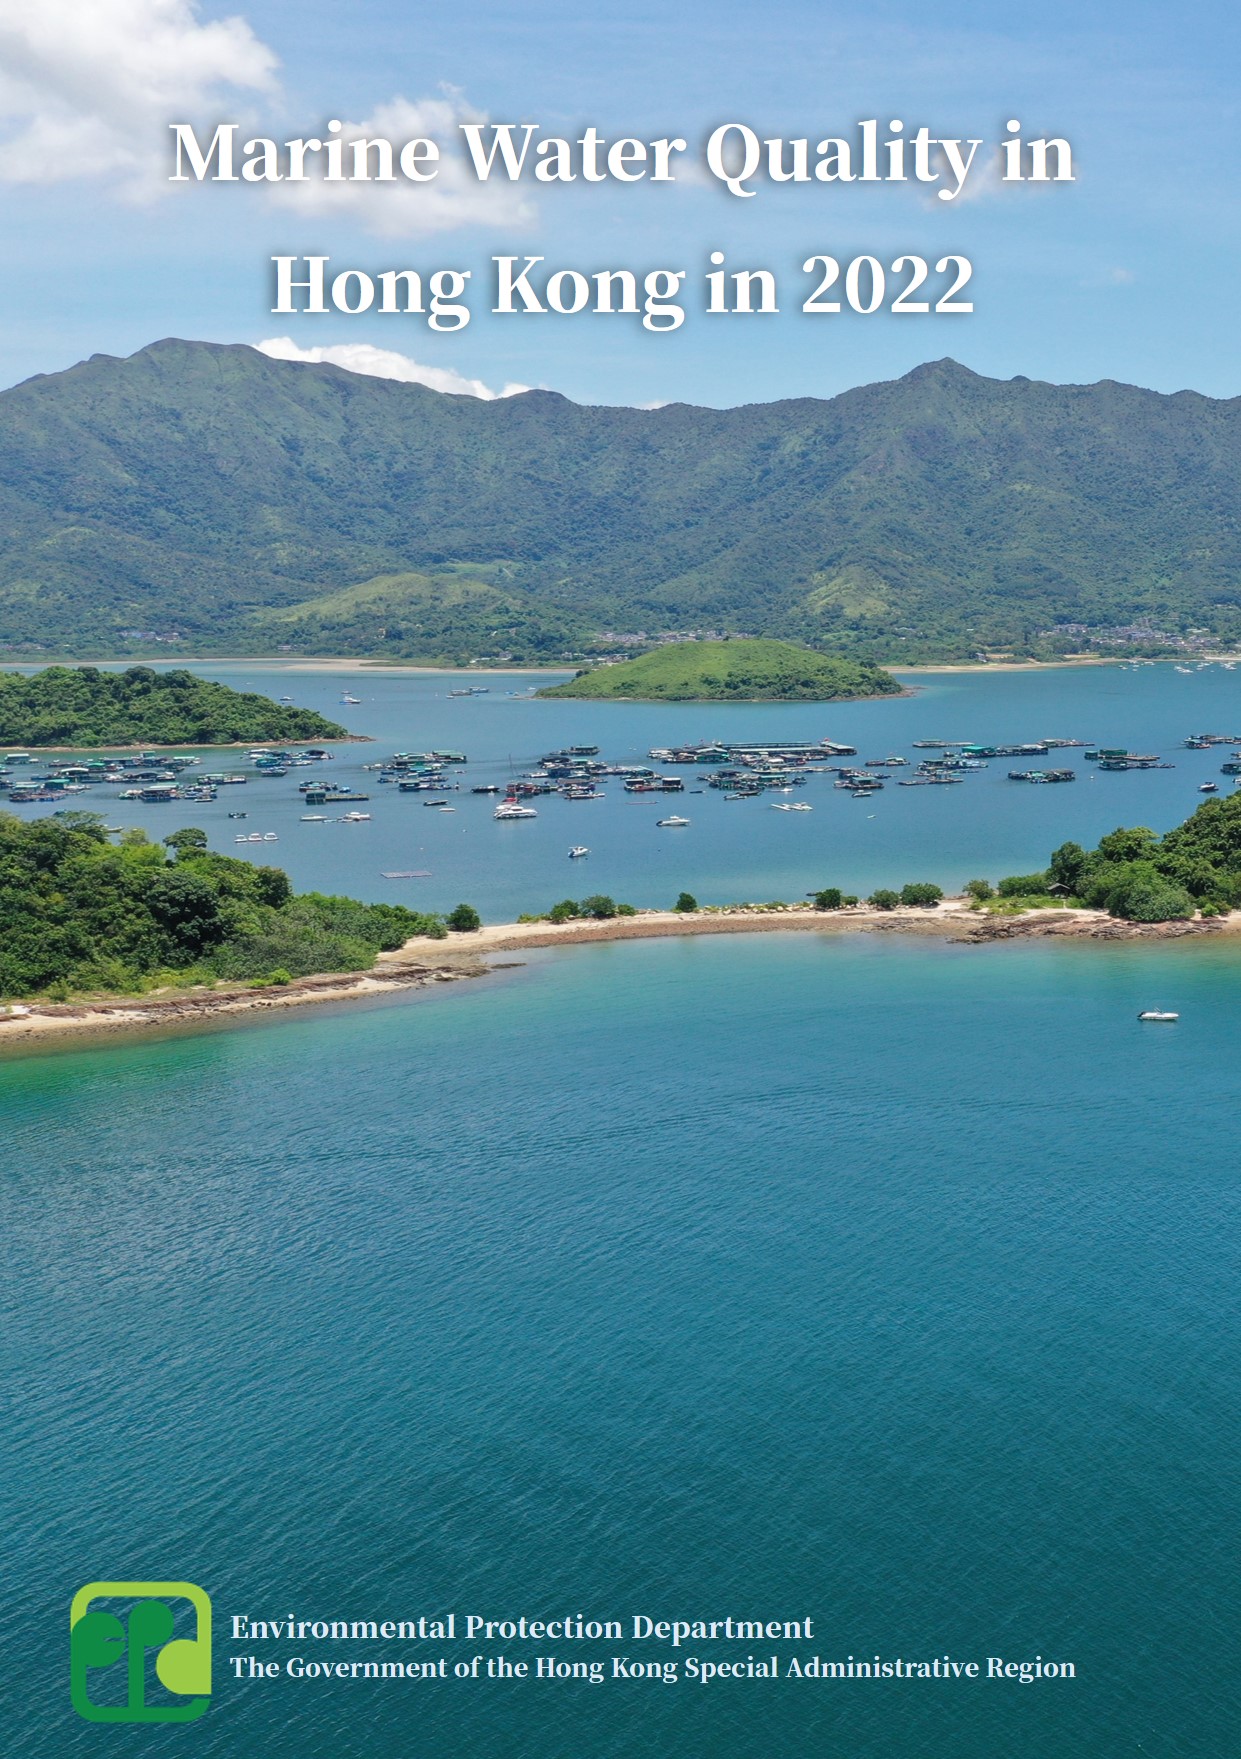 2022 Annual Marine Water Quality Reports